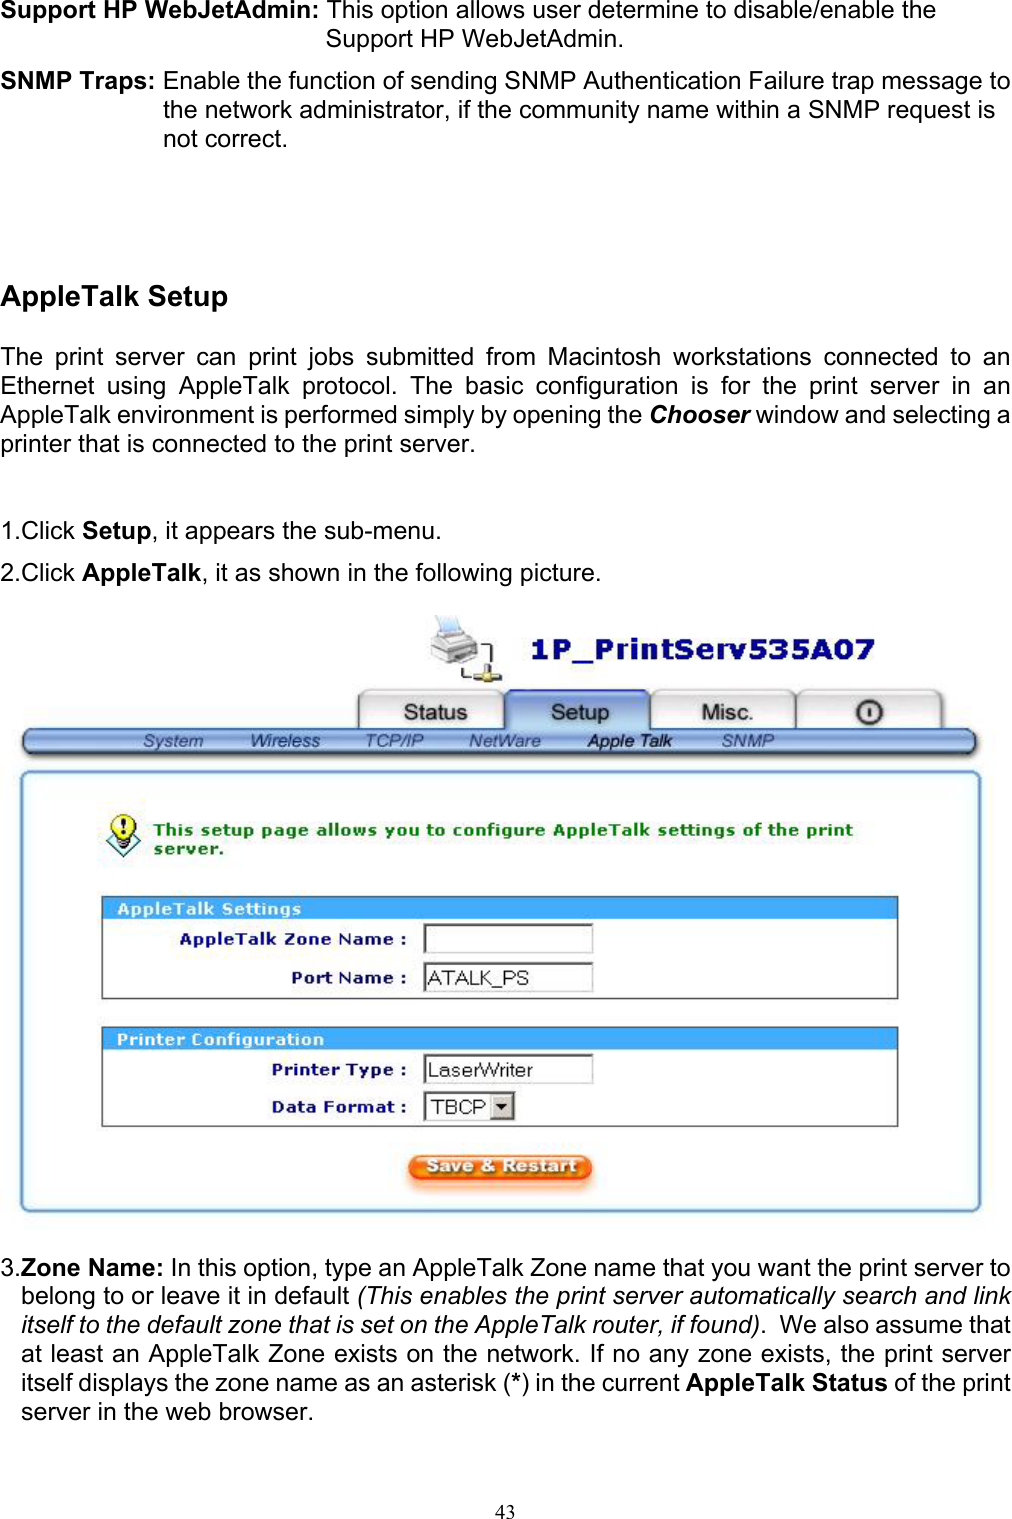                                                                                             43  Support HP WebJetAdmin: This option allows user determine to disable/enable the Support HP WebJetAdmin. SNMP Traps: Enable the function of sending SNMP Authentication Failure trap message to the network administrator, if the community name within a SNMP request is not correct.     AppleTalk Setup  The print server can print jobs submitted from Macintosh workstations connected to an Ethernet using AppleTalk protocol. The basic configuration is for the print server in an AppleTalk environment is performed simply by opening the Chooser window and selecting a printer that is connected to the print server.   1.Click Setup, it appears the sub-menu. 2.Click AppleTalk, it as shown in the following picture.    3.Zone Name: In this option, type an AppleTalk Zone name that you want the print server to belong to or leave it in default (This enables the print server automatically search and link itself to the default zone that is set on the AppleTalk router, if found).  We also assume that at least an AppleTalk Zone exists on the network. If no any zone exists, the print server itself displays the zone name as an asterisk (*) in the current AppleTalk Status of the print server in the web browser. 